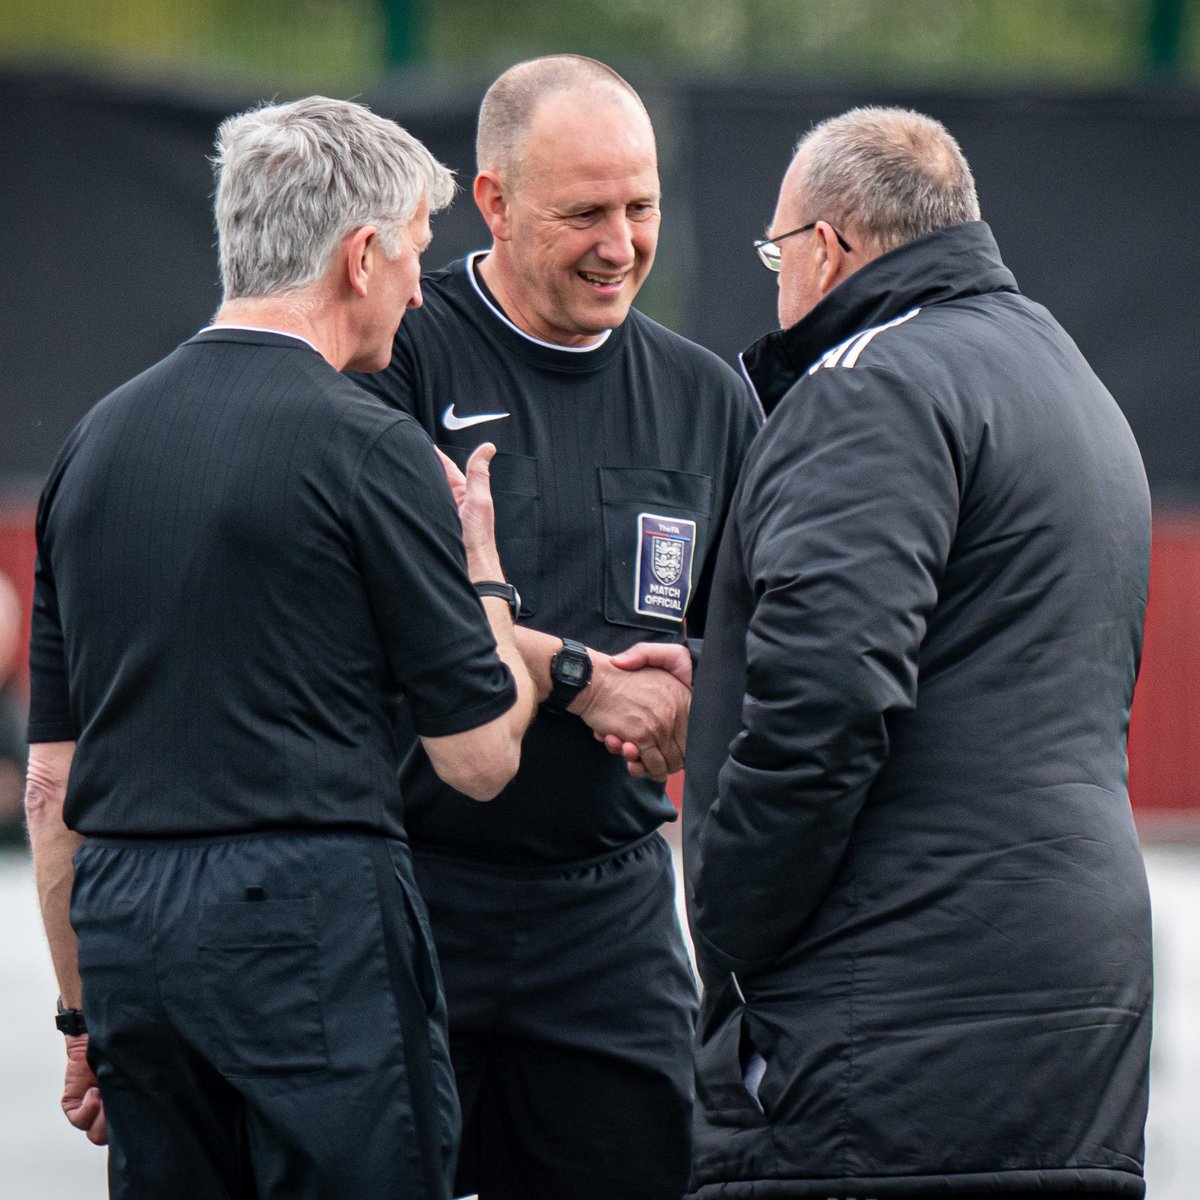 The Club extends its gratitude to local referee Gary Taylor for stepping in to run the line yesterday, after the match referee was unable to continue through injury. Gary continues to officiate football in the local community, and his efforts yesterday are appreciated by all 🙌